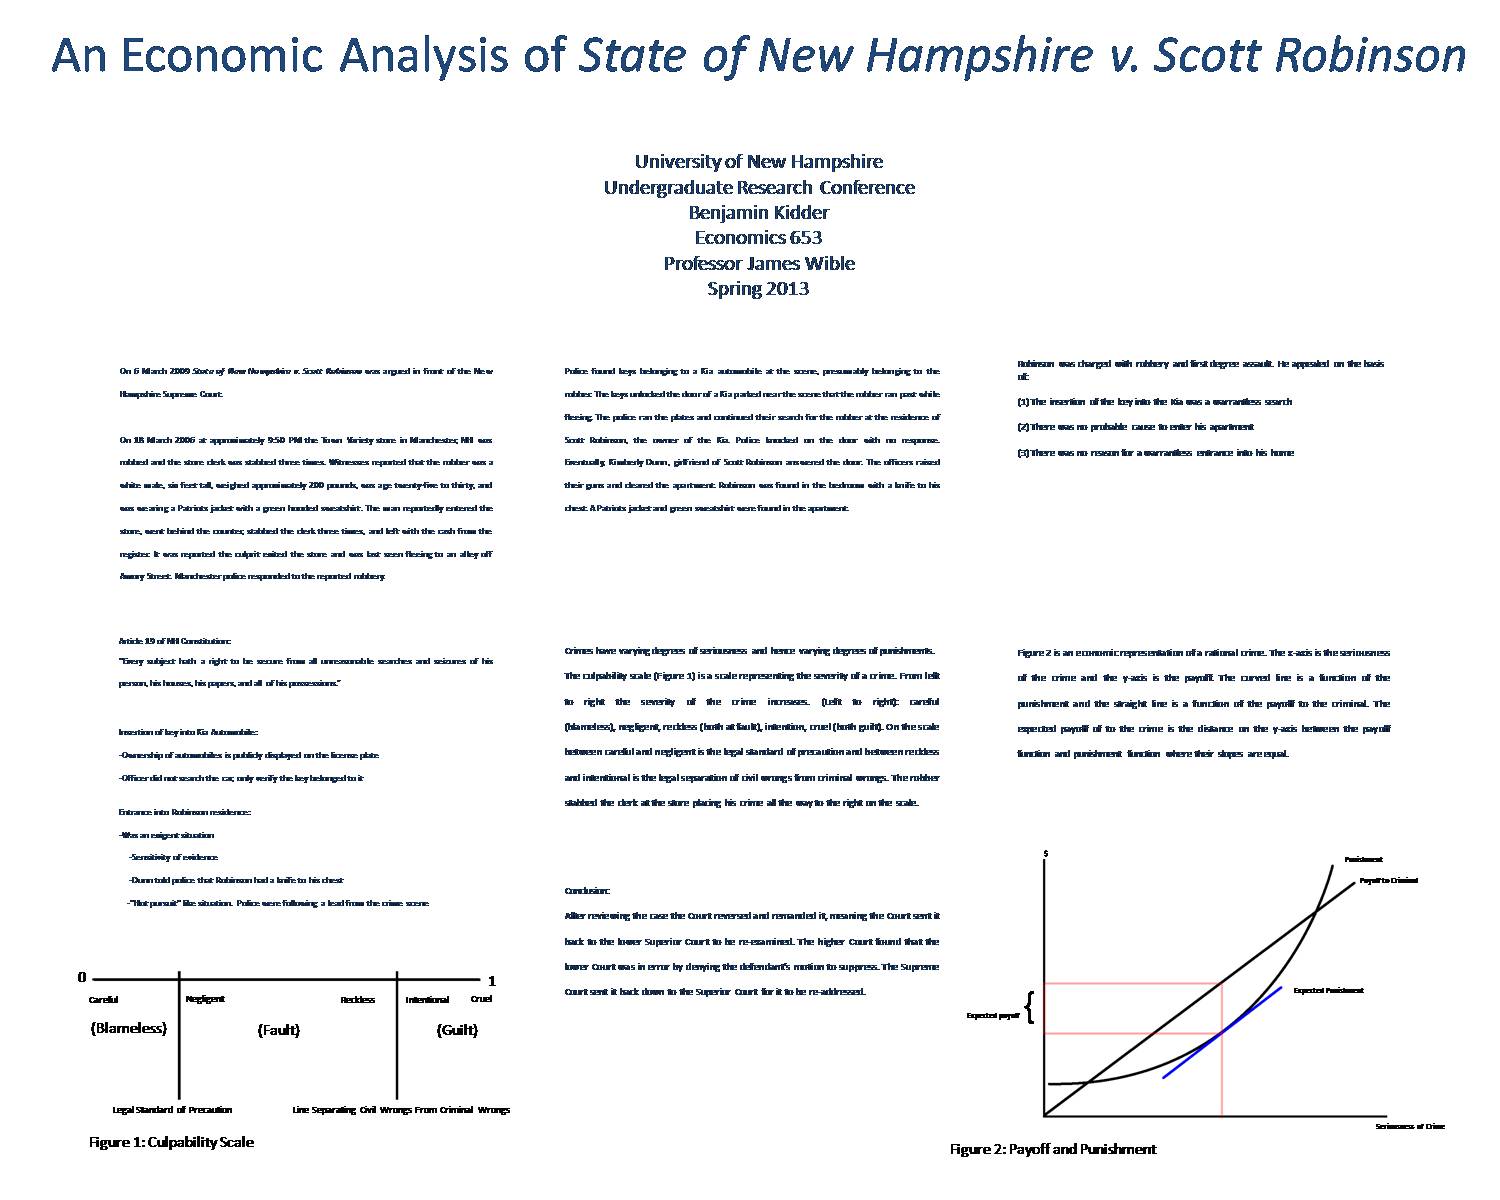 An Economics Analysis Of State Of New Hampshire V. Scott Robinson by benjaminpk